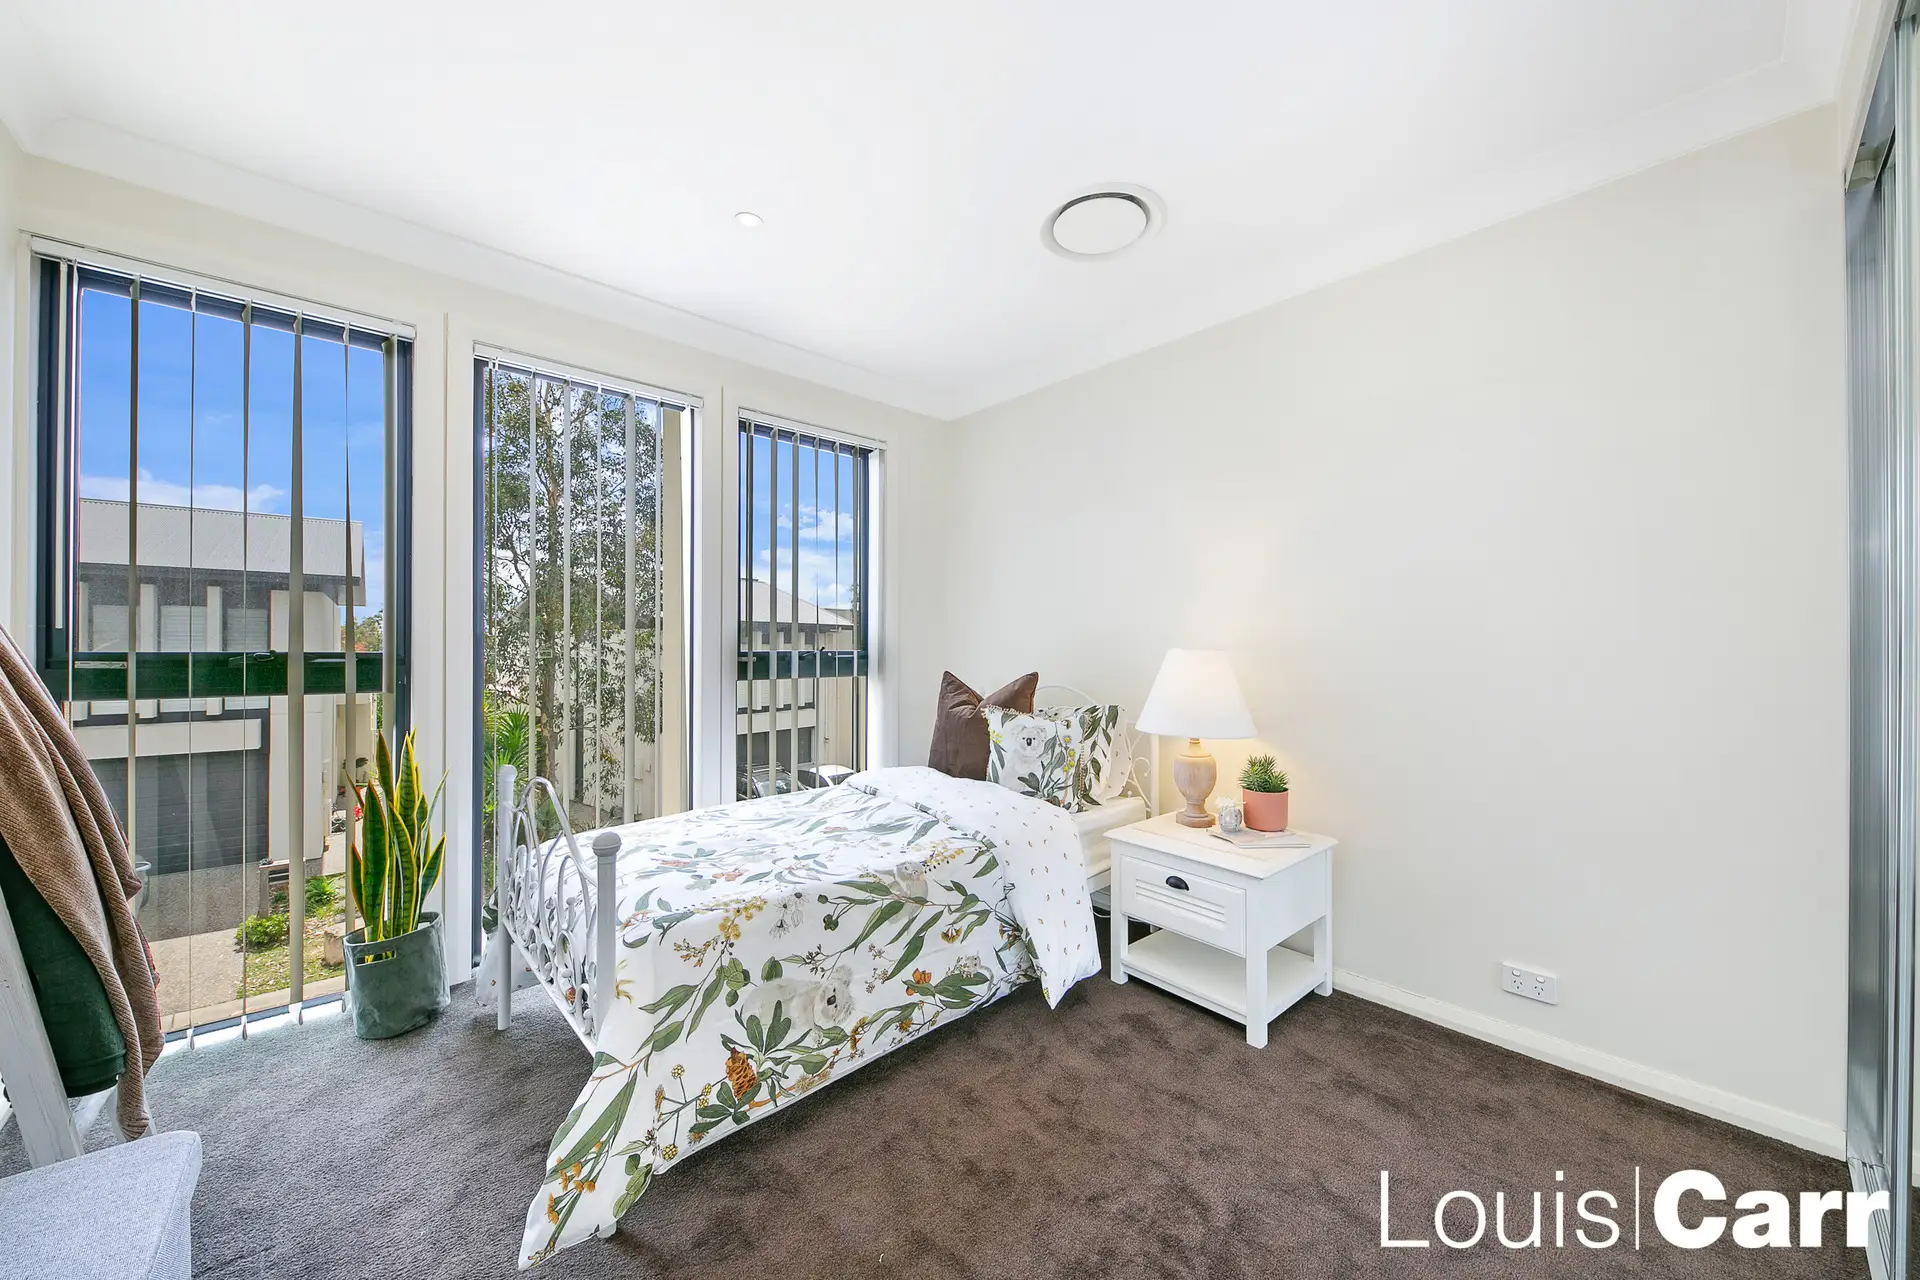 Photo #7: 15 Grace Crescent, Kellyville - Sold by Louis Carr Real Estate